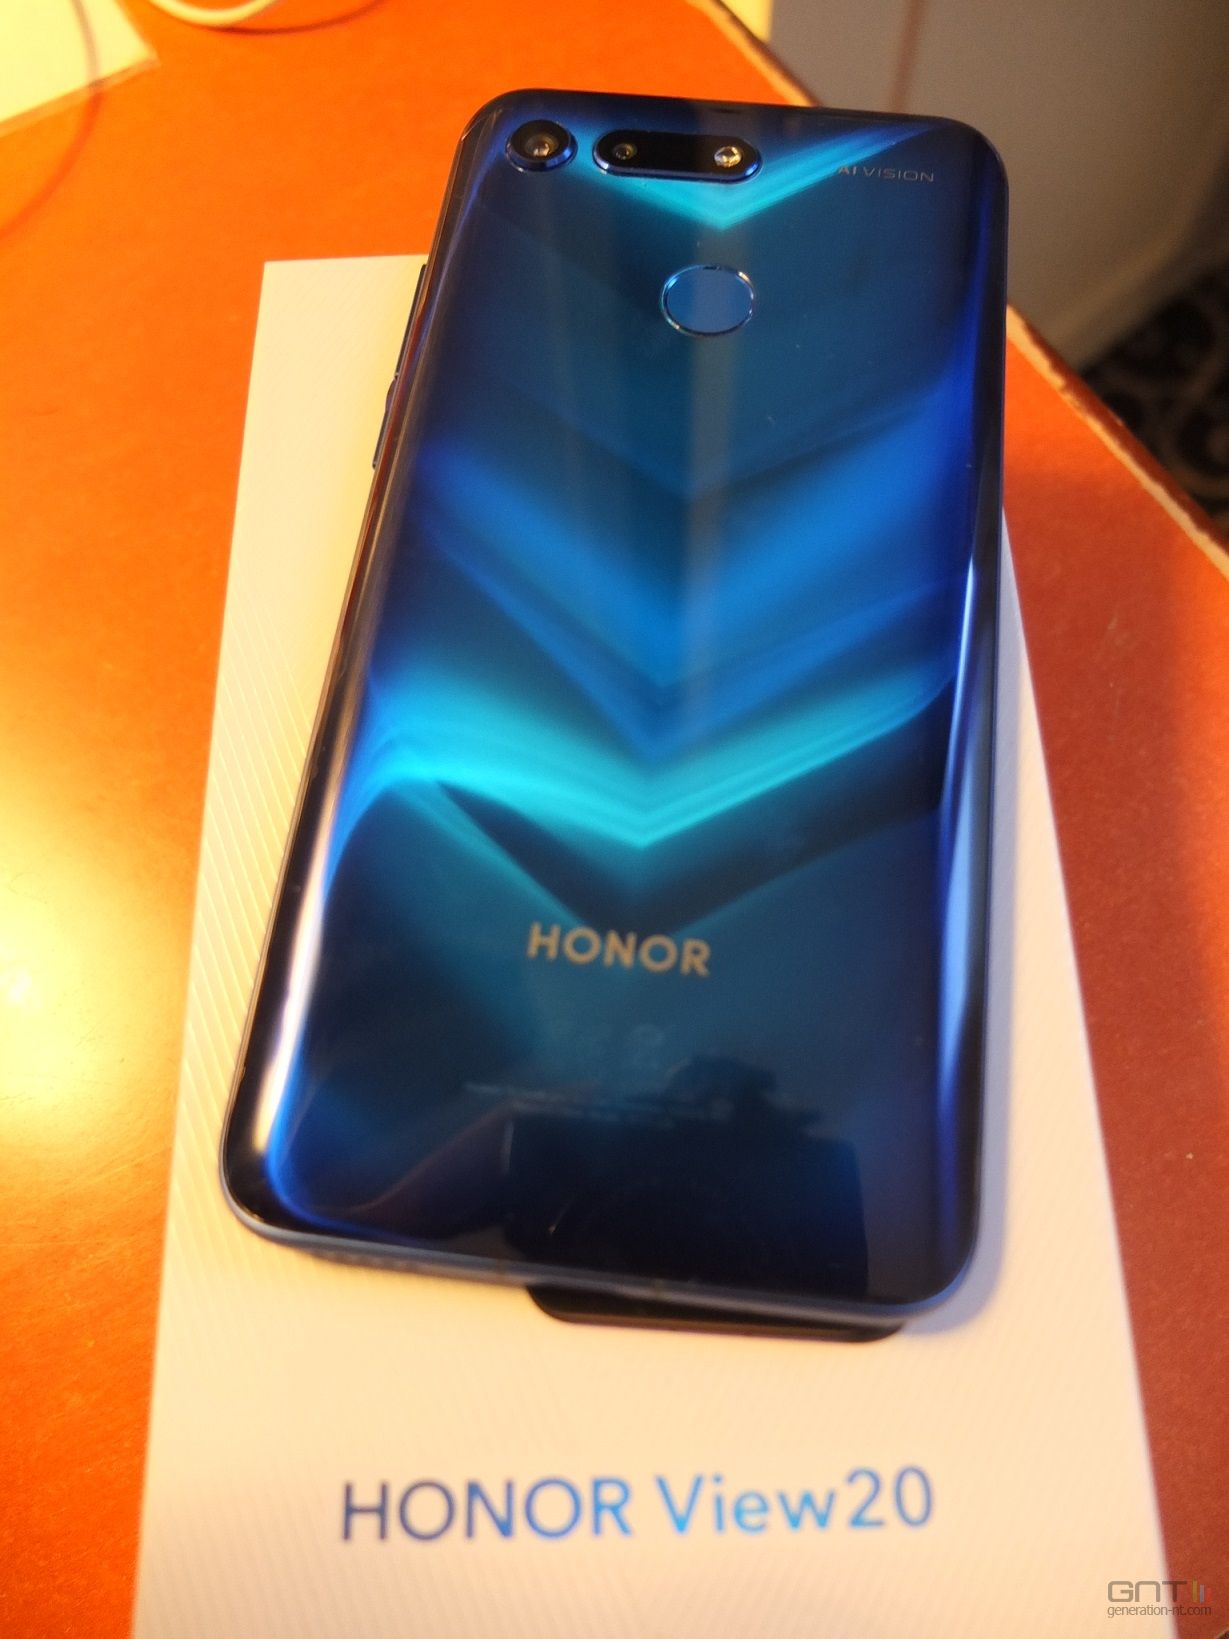 Honor View 20 dos